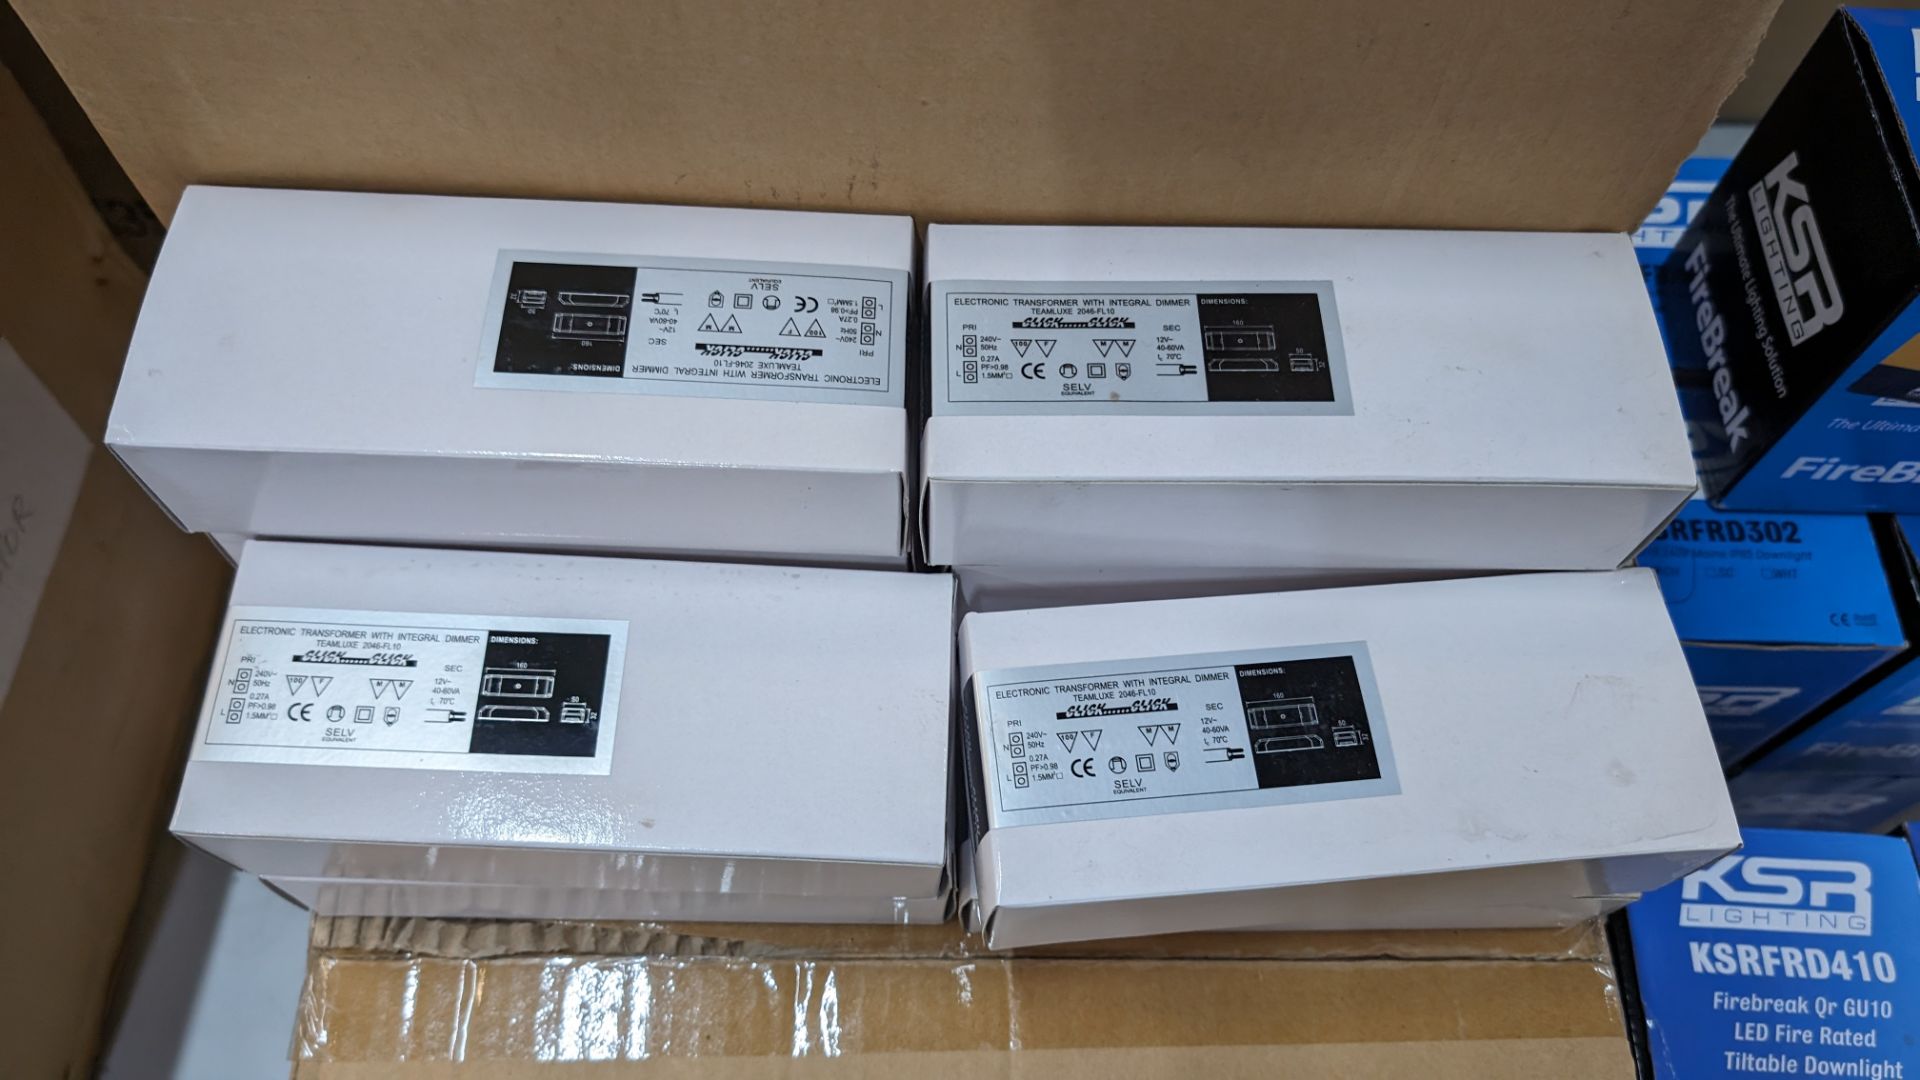 210 off Teamluxe electronic transformers with integral dimmer (5 boxes plus 10 loose transformers) - Image 4 of 5